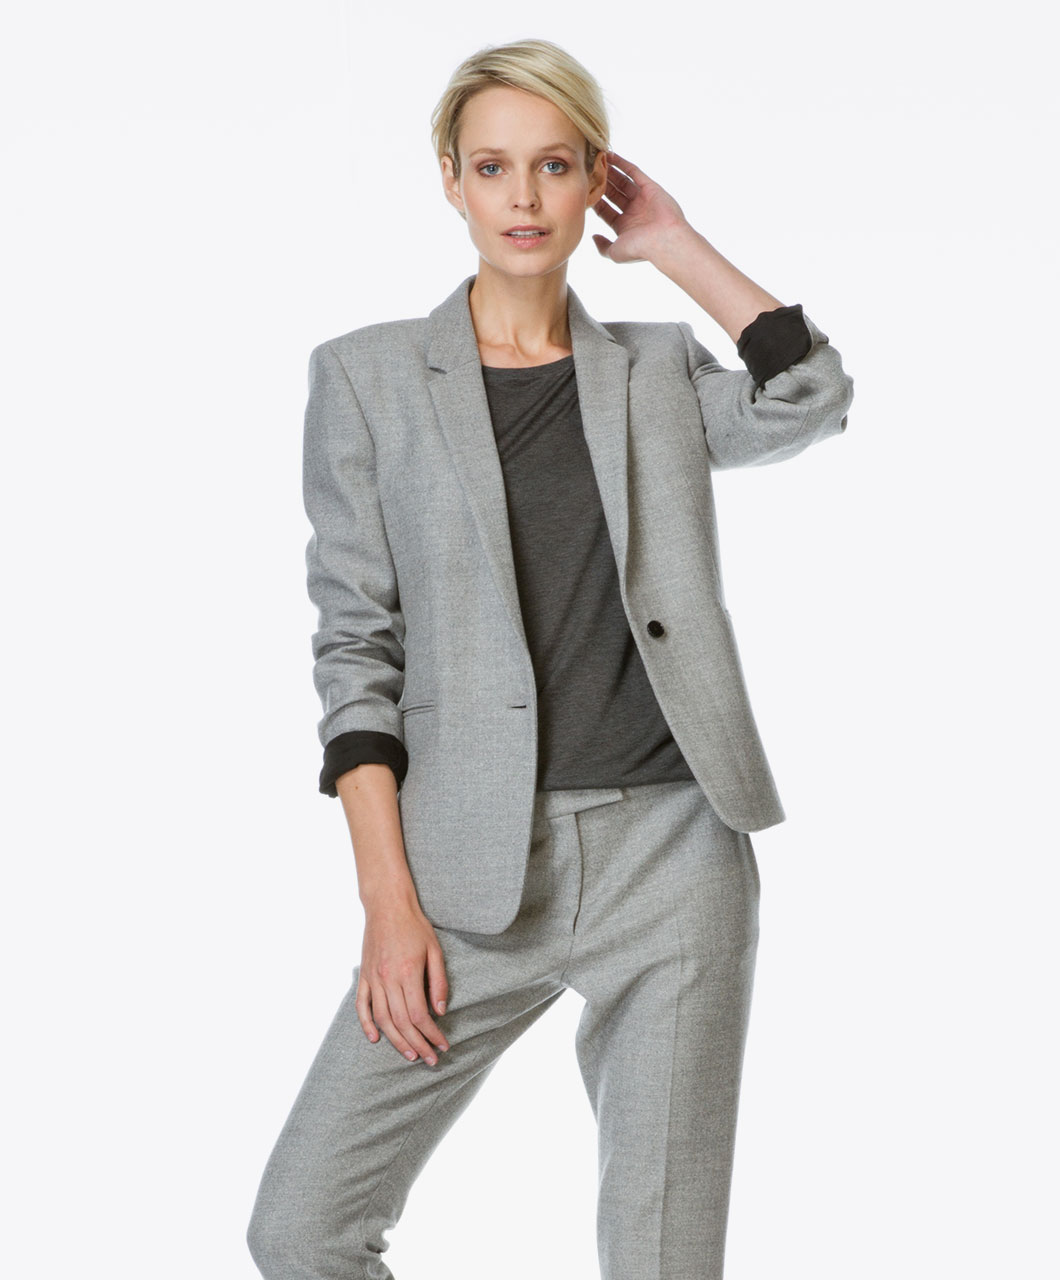 Shop the look - A Suit At It's Best | Perfectly Basics